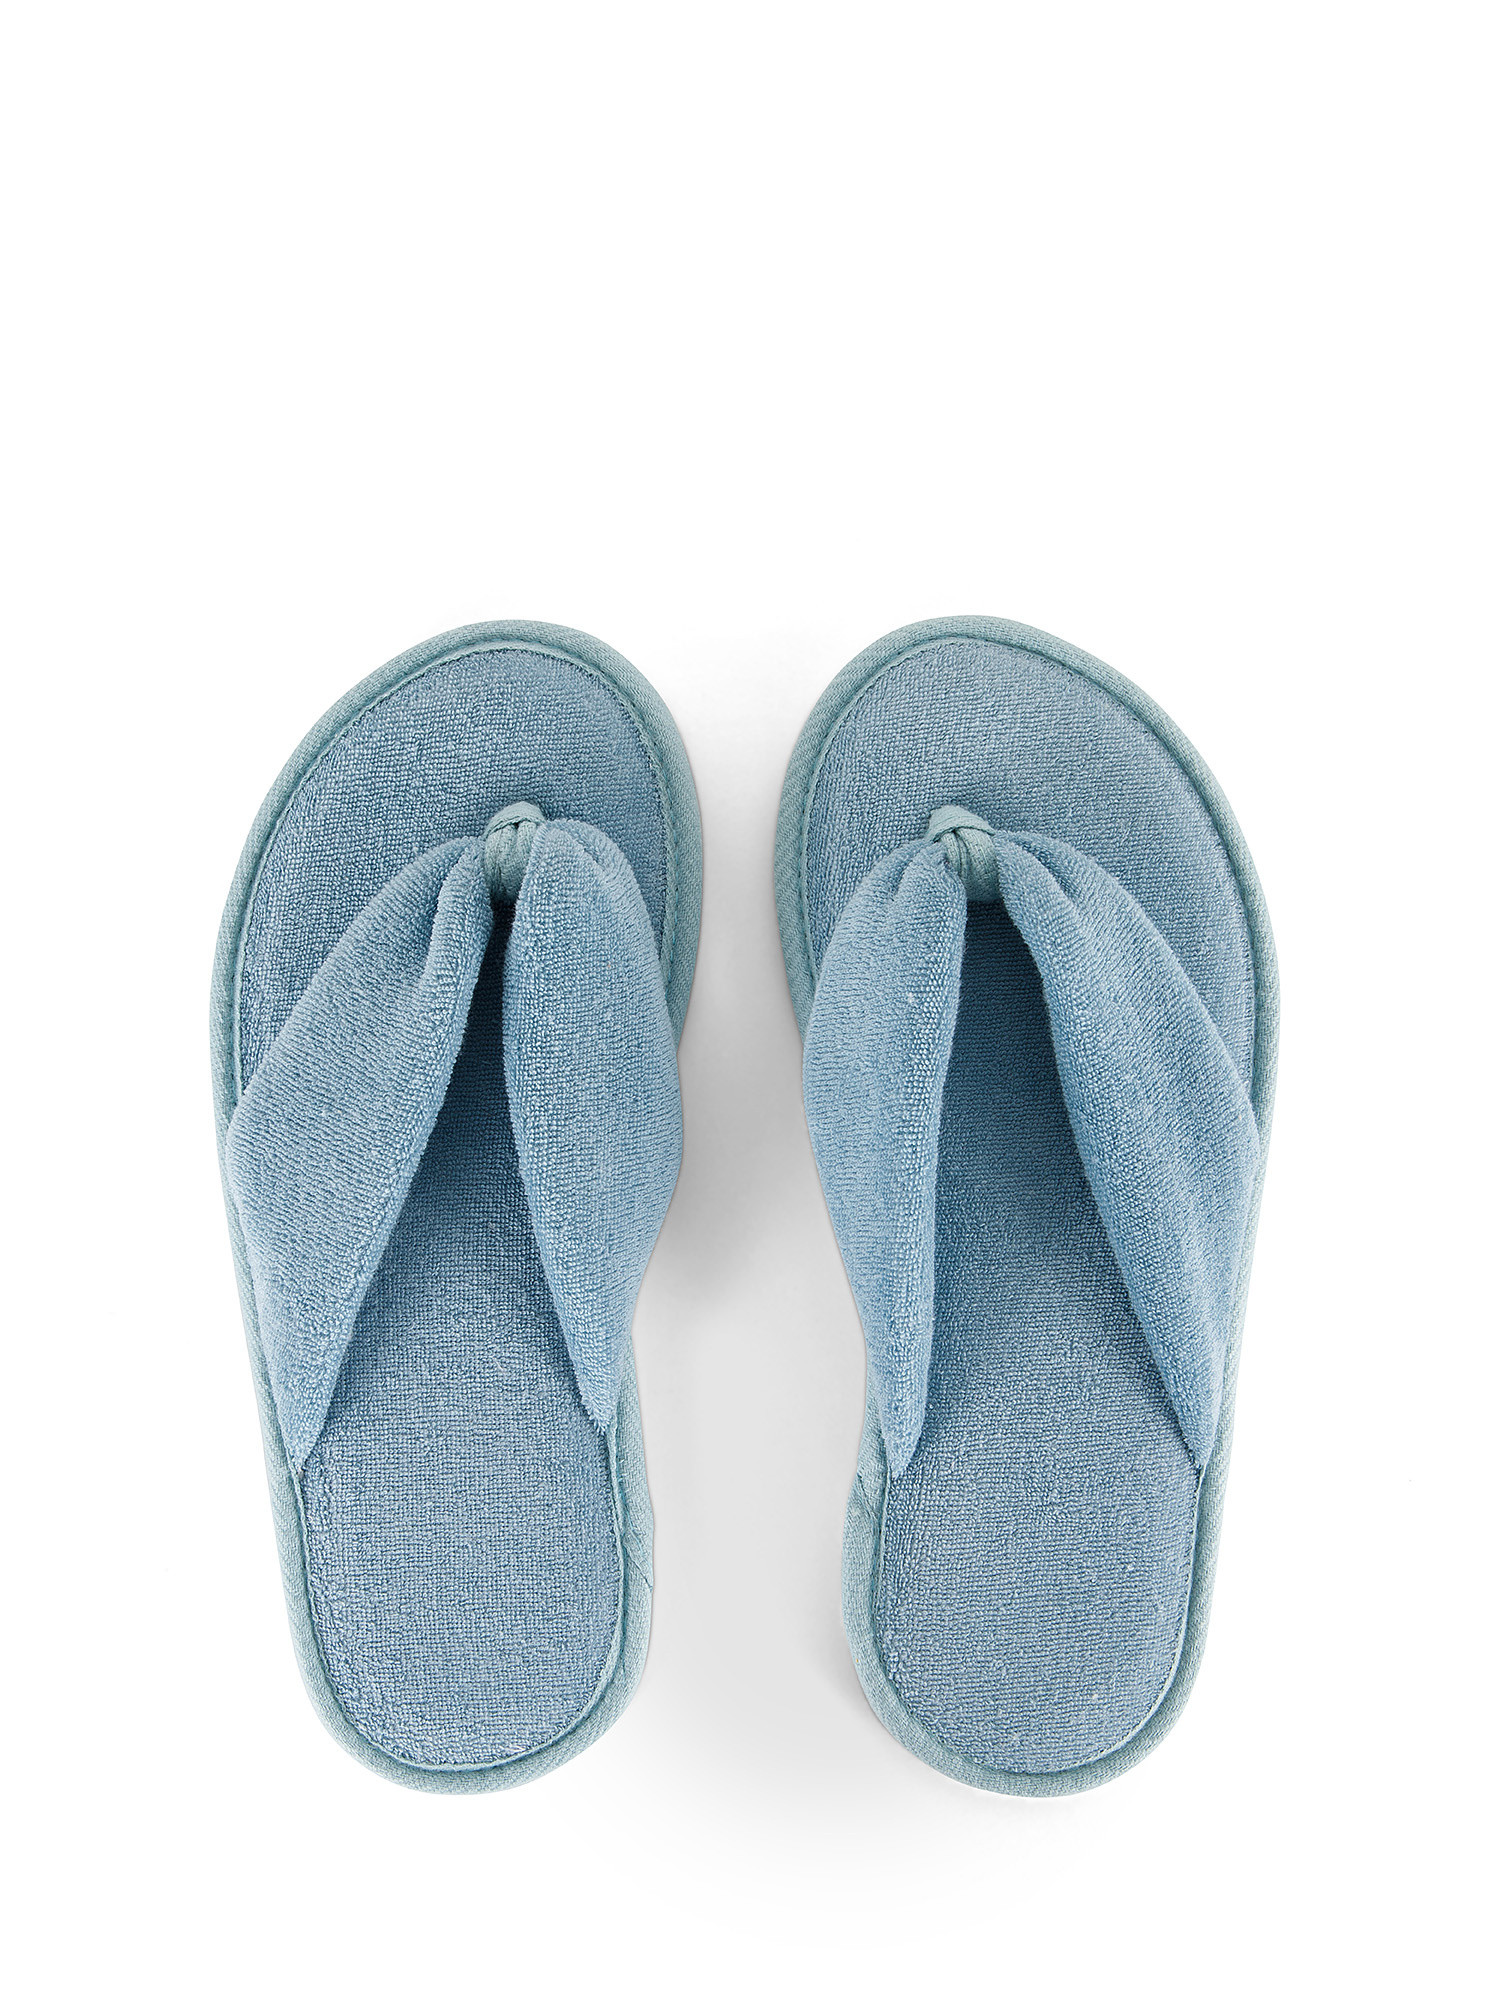 Solid color micro sponge thong slippers, Light Blue, large image number 0